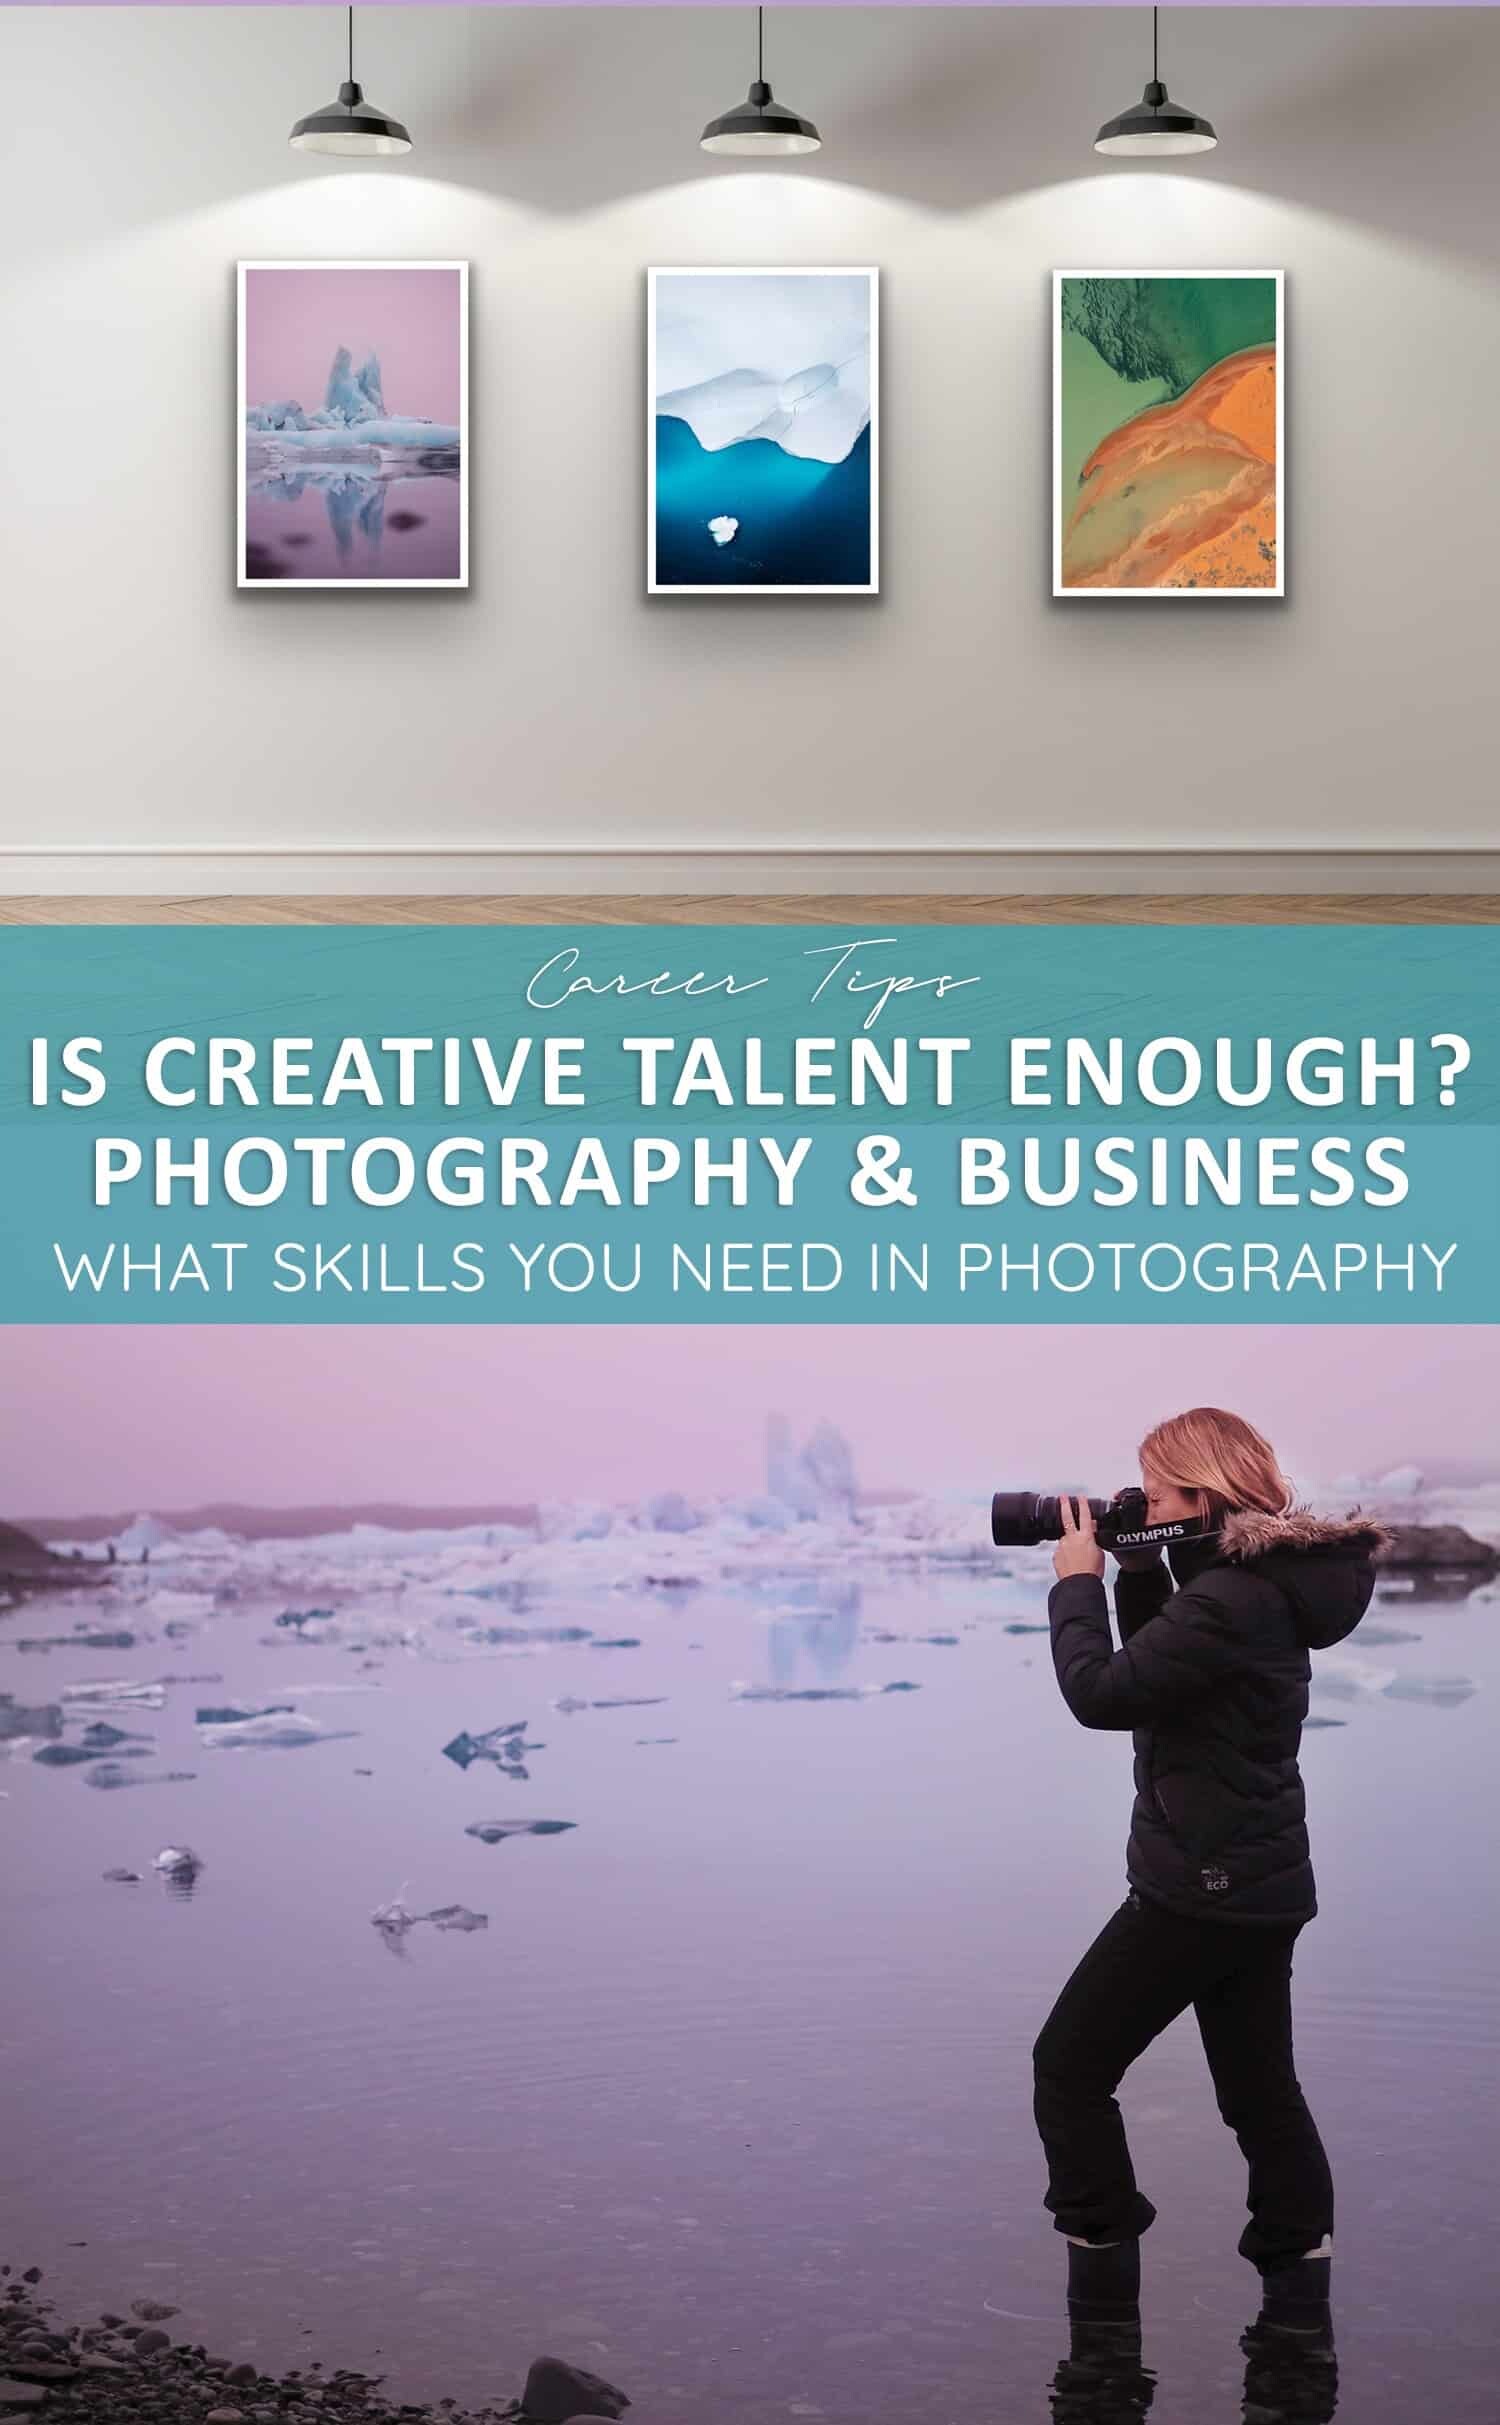 The Business of Photography - What skills you need to be a photographer